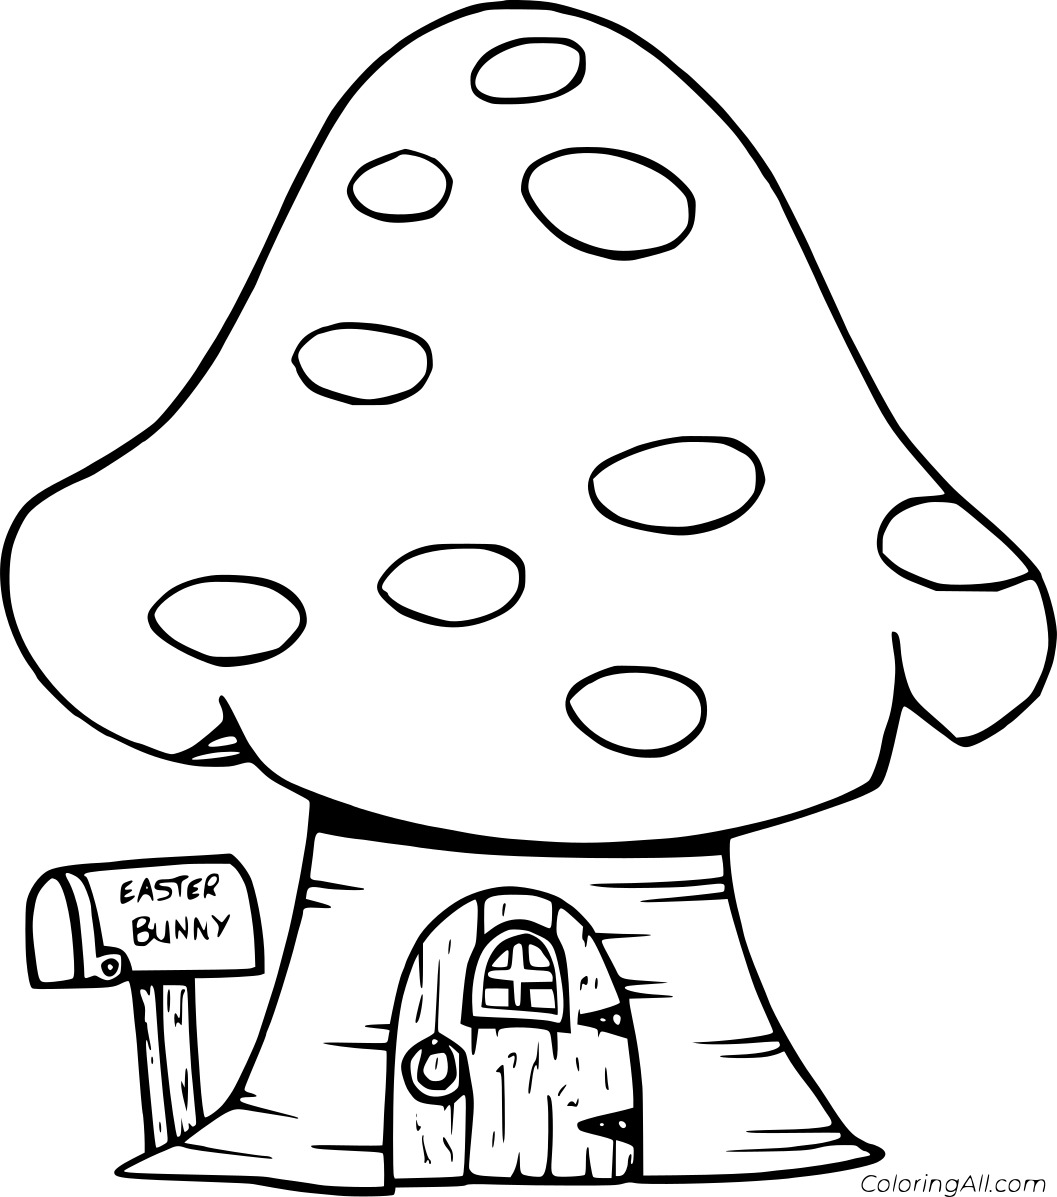 Easter Bunny In The Mushroom House Coloring Page